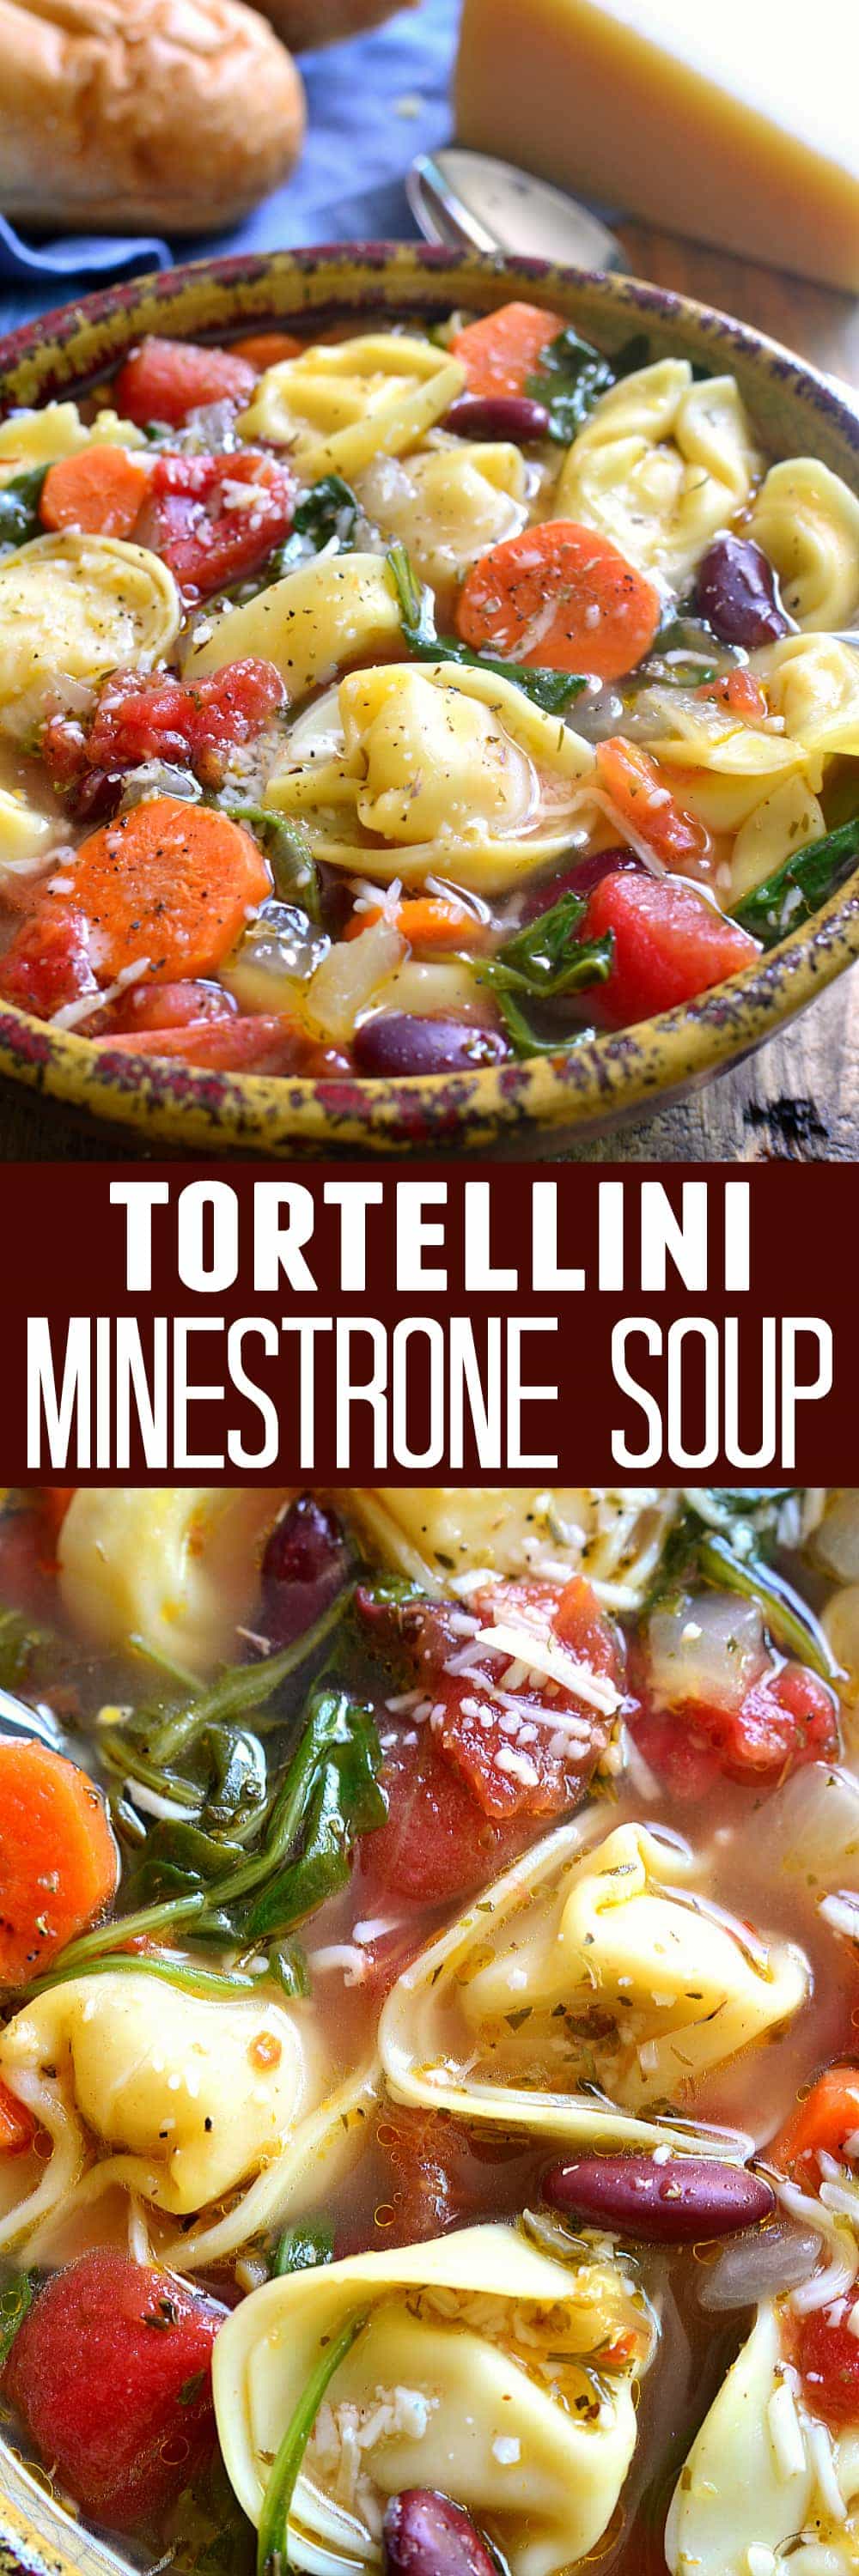 This Tortellini Minestrone Soup is loaded with veggies and packed with delicious flavor! Ready in just 30 minutes!